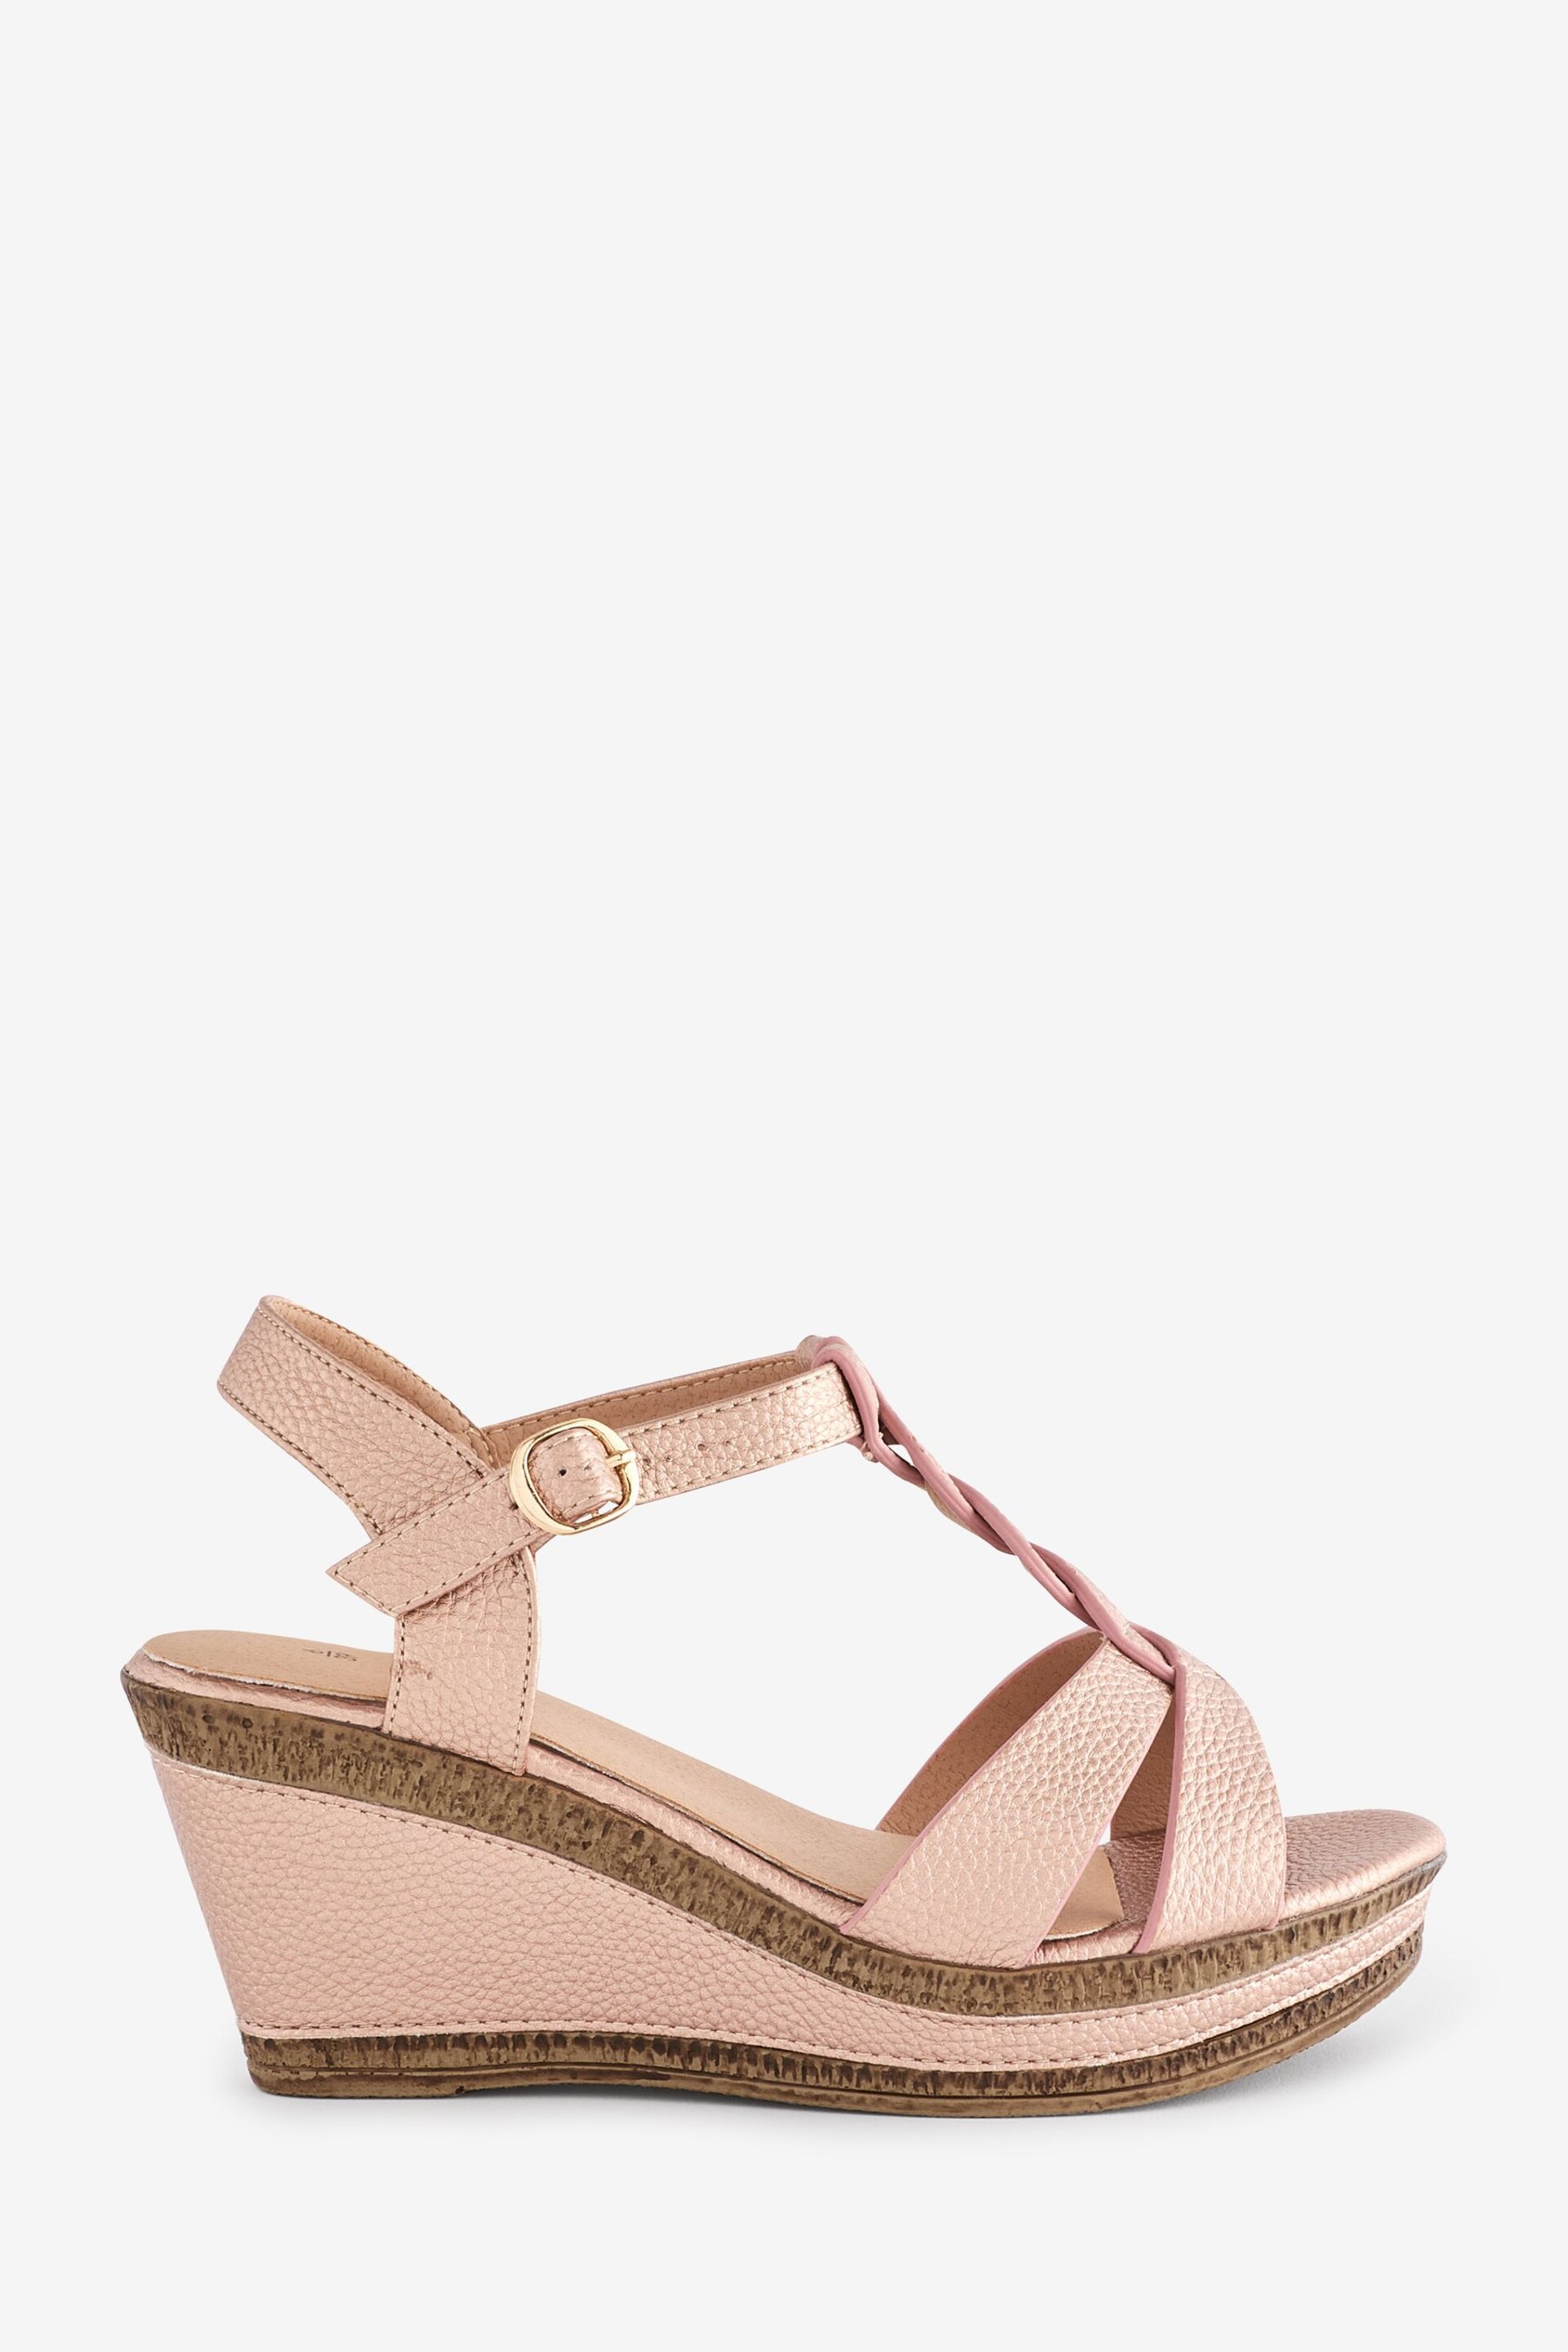 Yours Curve Gold Extra Wide Fit Cross Strap Wedges Heels - Image 2 of 5